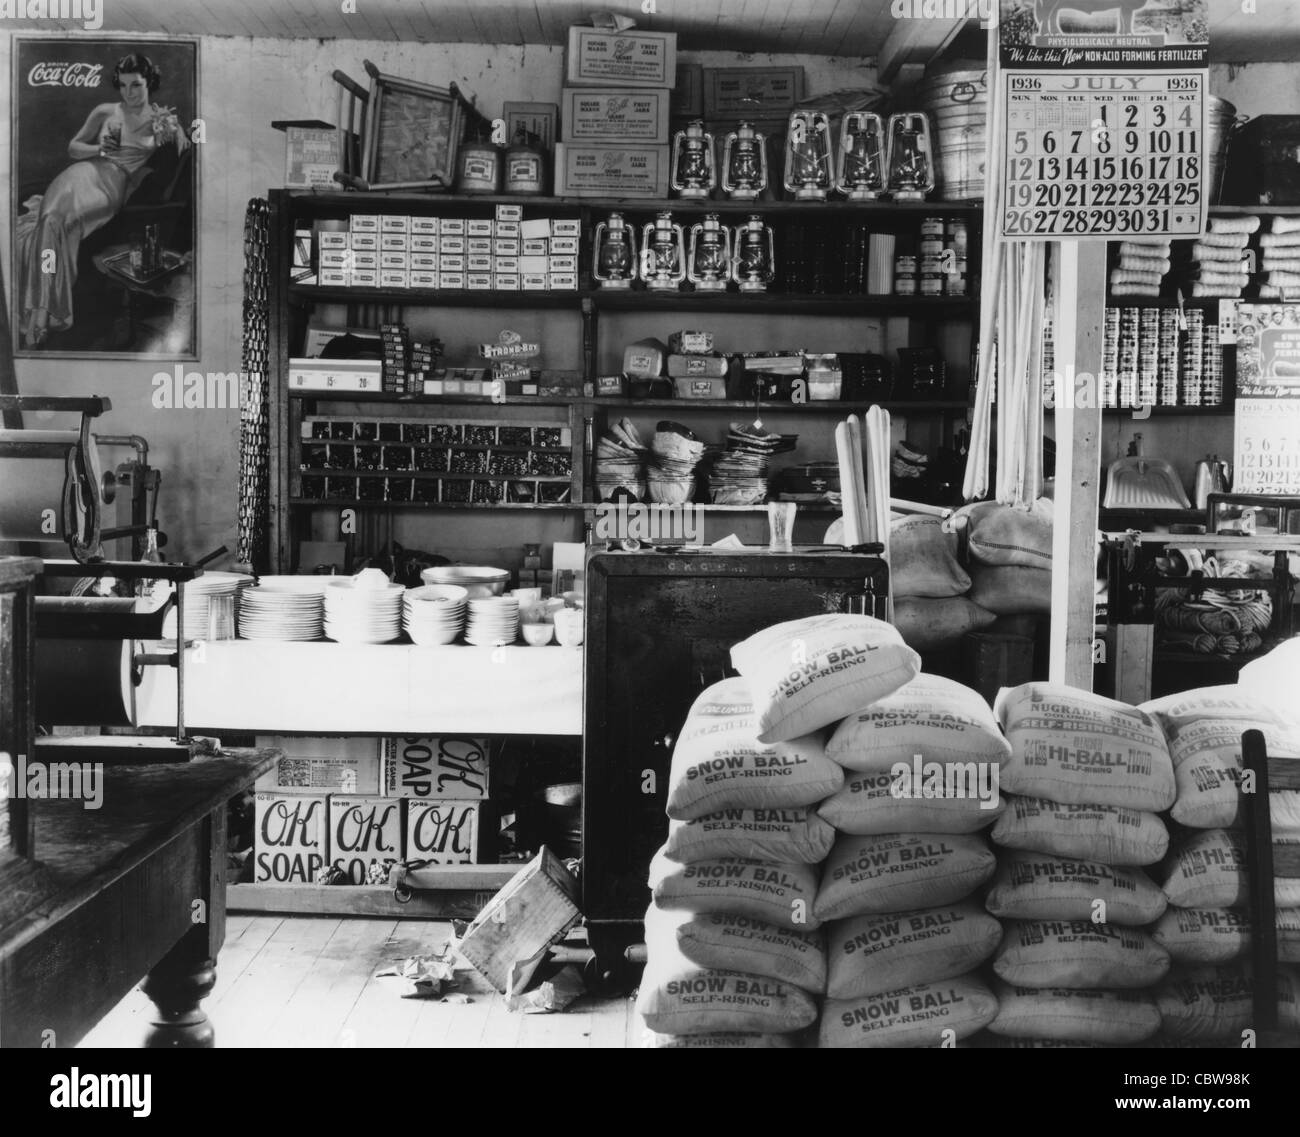 General store interior Black and White Stock Photos & Images - Alamy